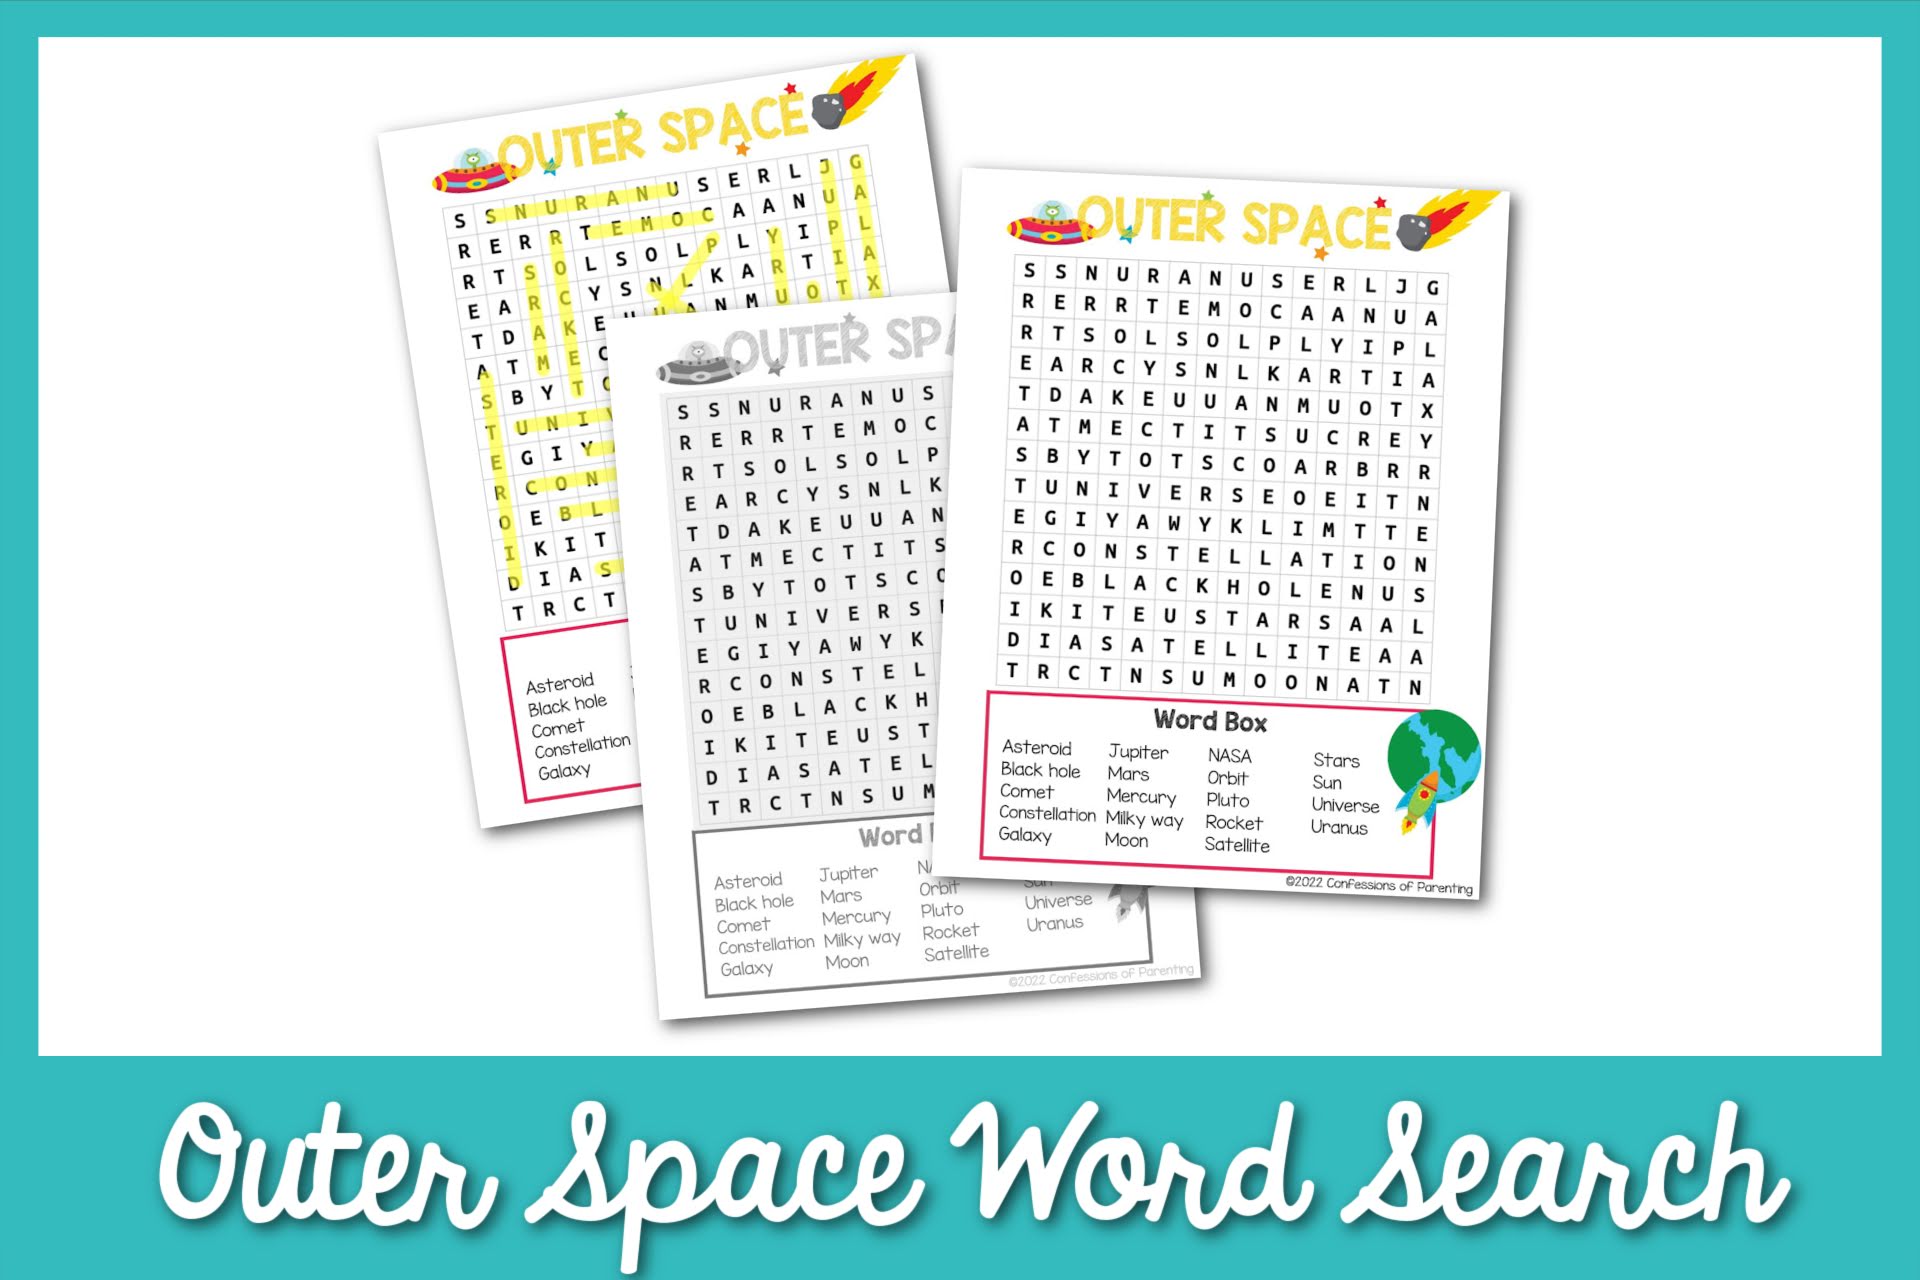 featured image: outer space word search on a blue border